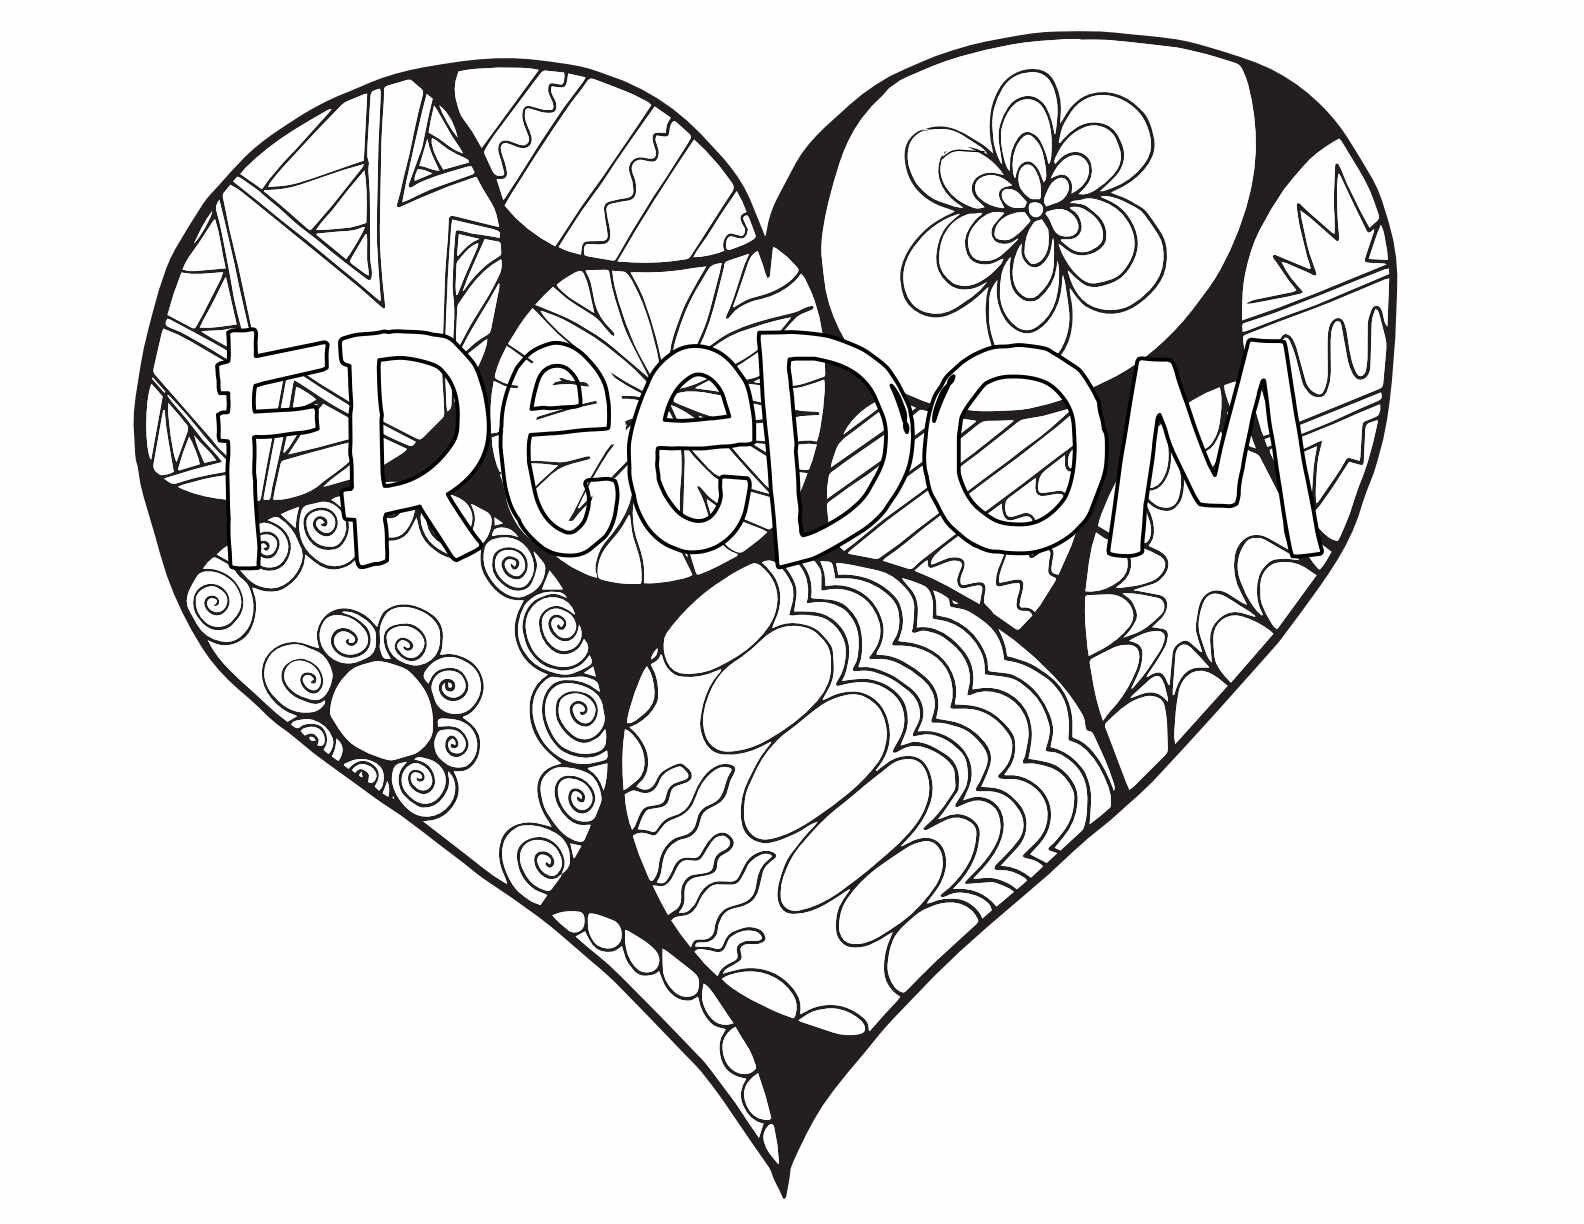 3 FREE FREEDOM PRINTABLE COLORING PAGES CLICK HERE TO DOWNLOAD THE PAGE ABOVE